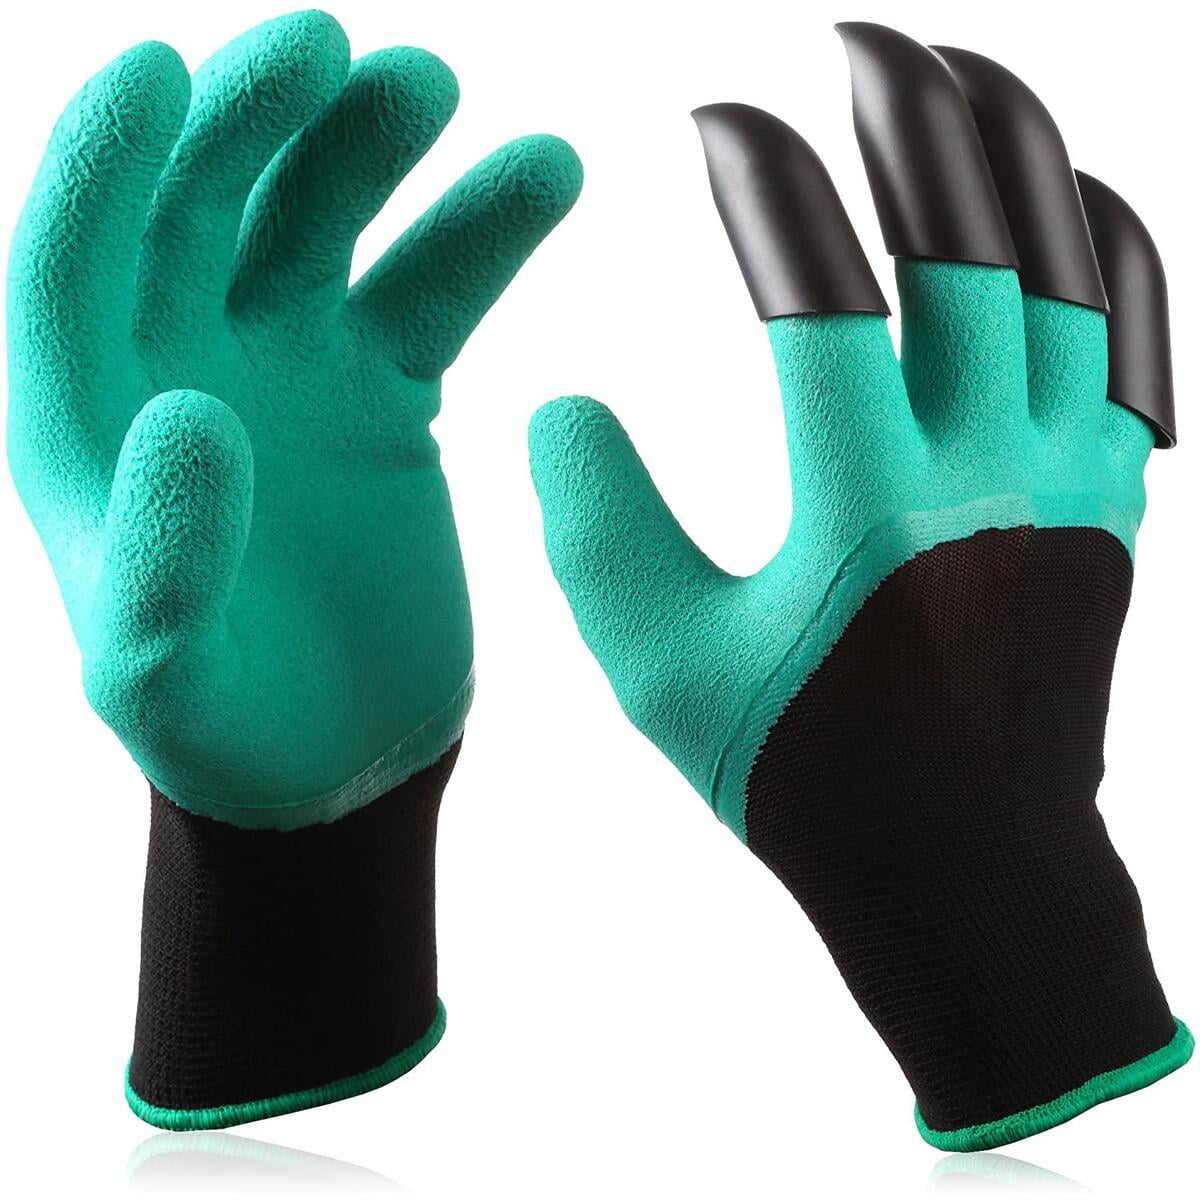 Garden Genie Gloves Claws for Digging Planting Gardening Gloves Multiple Colour 